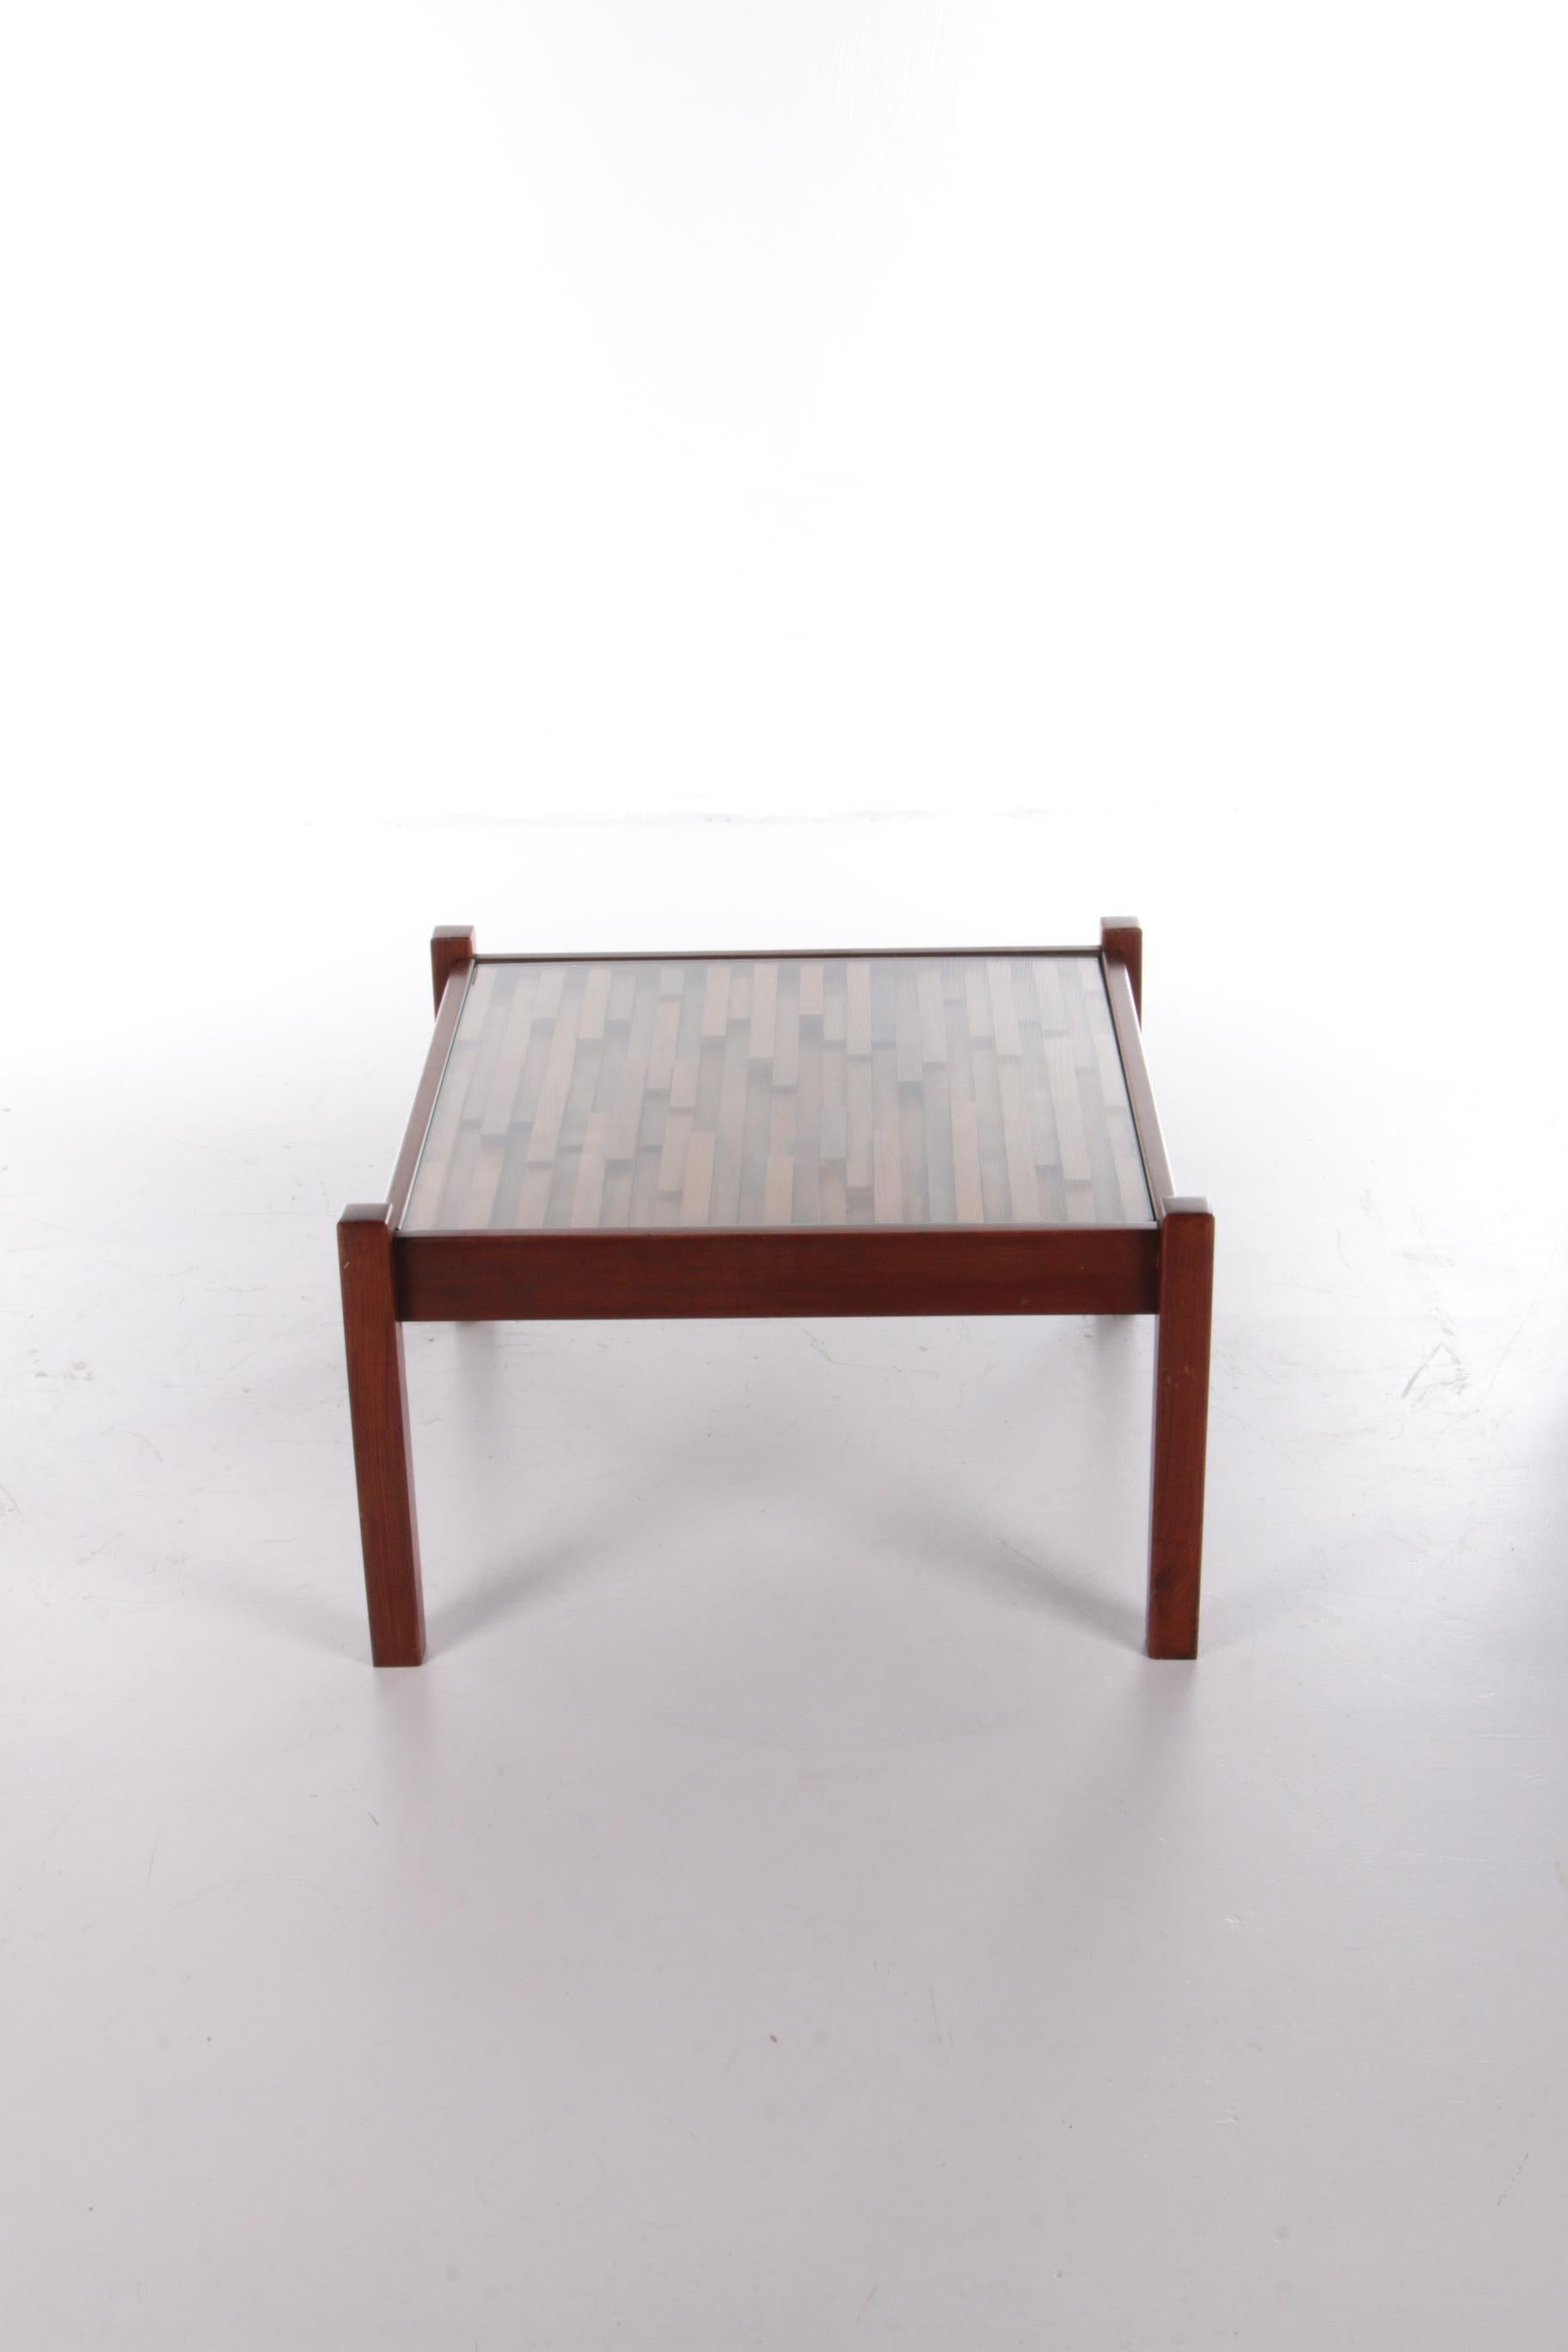 Brazilian Coffee Table Design by Percival Lafer, 1960s For Sale 1